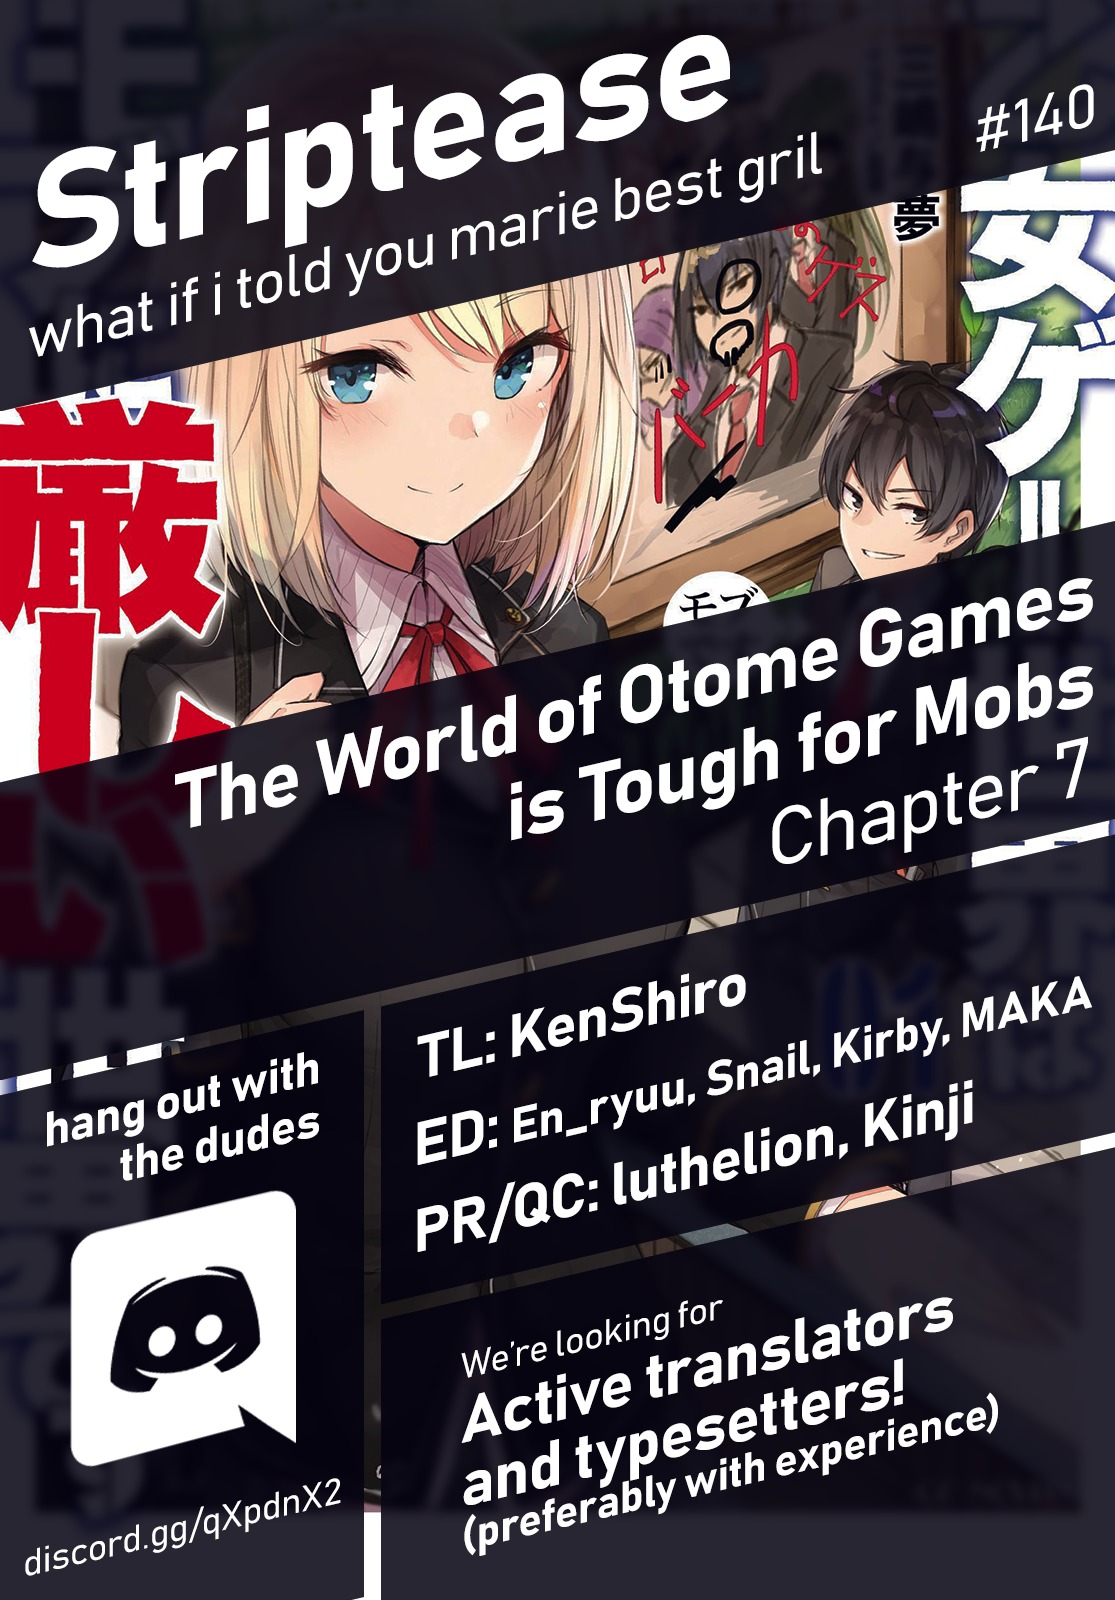 The World of Otome Games is Tough for Mobs ch.7